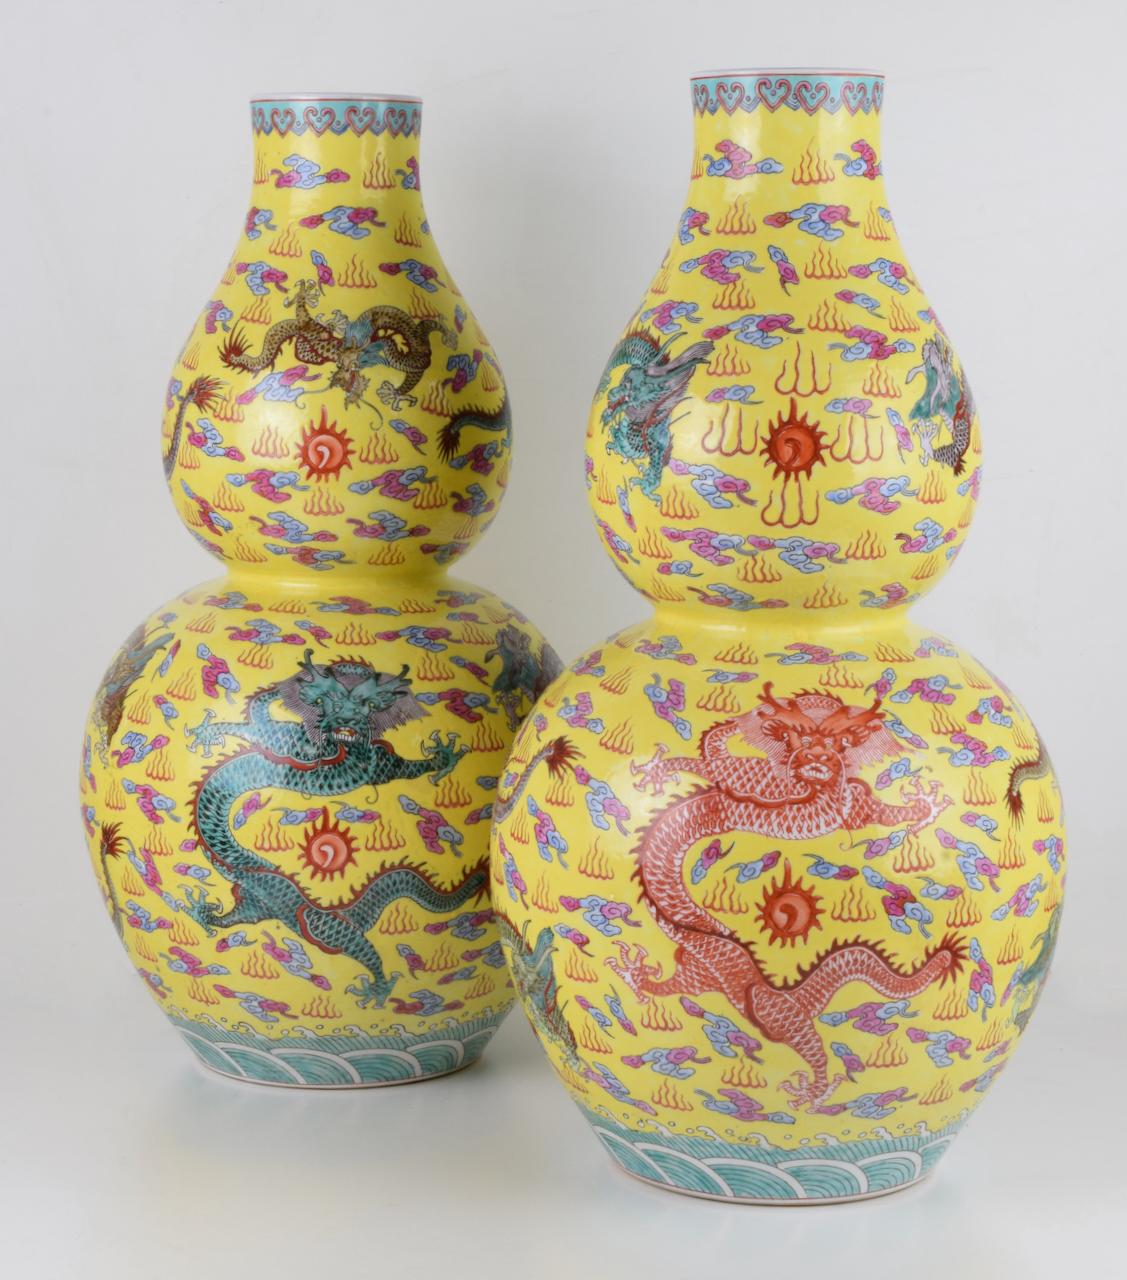 China, 20th century.
Yellow background porcelain with dragon decorations
Height cm 55.